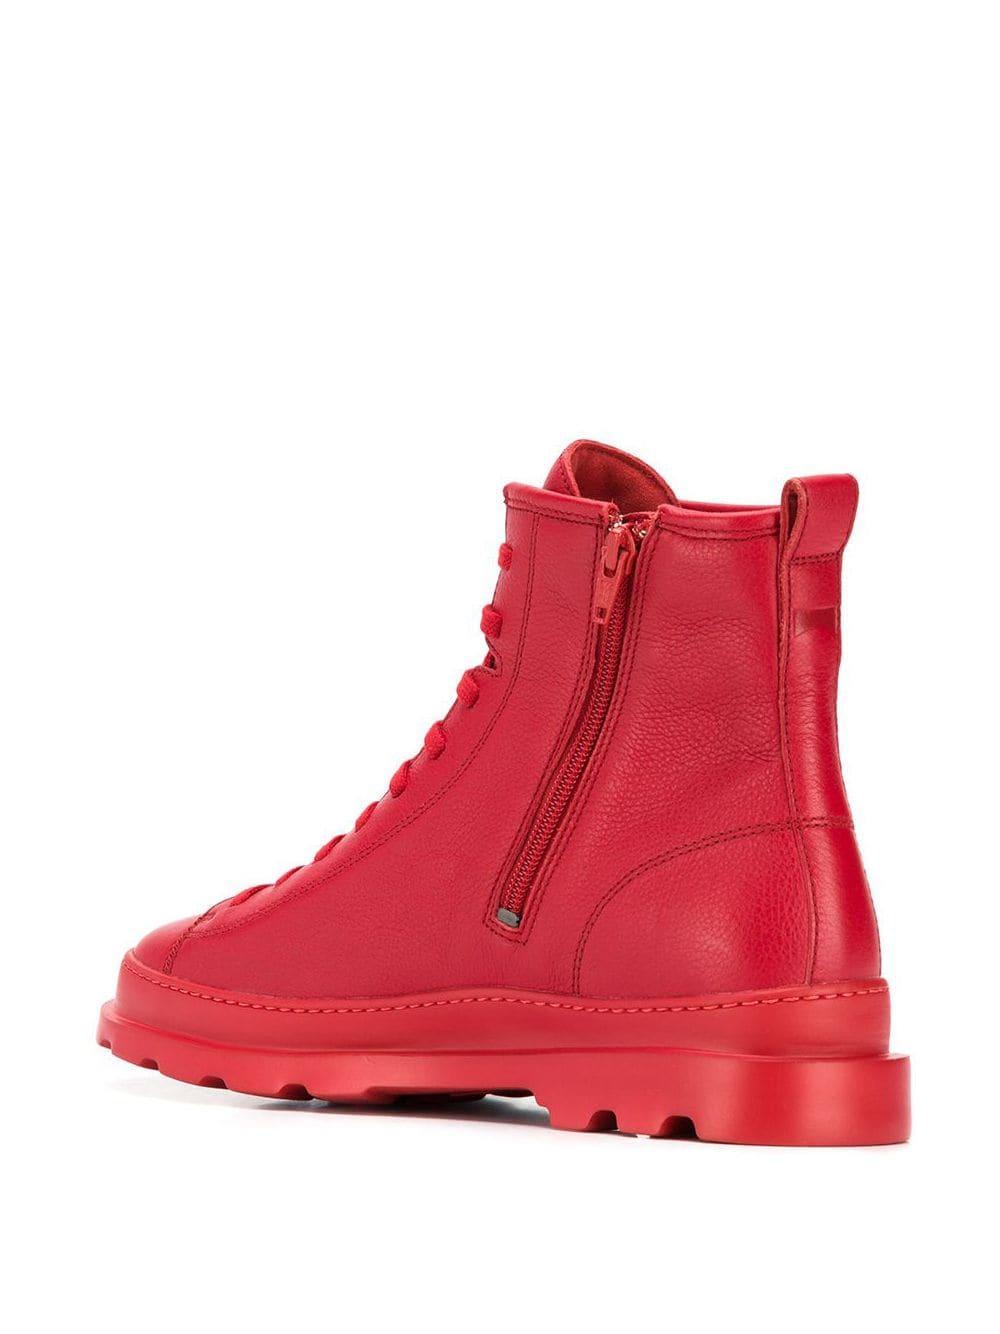 Camper Leather Brutus Boots in Red for Men - Lyst